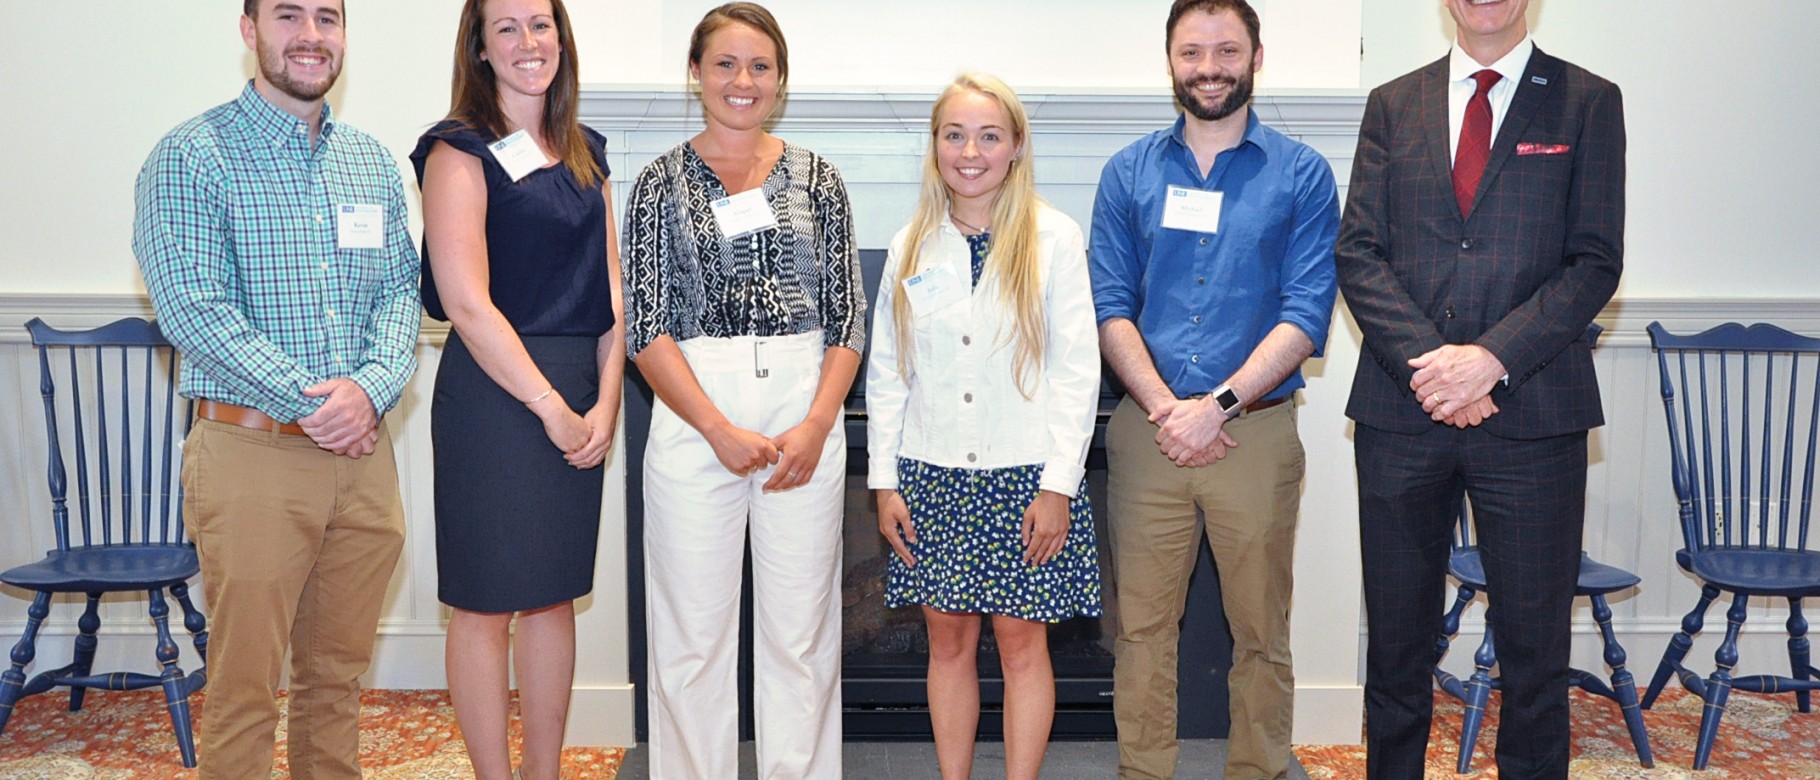 The 2019 Fuld scholarship recipients with UNE President James Herbert during a recent reception